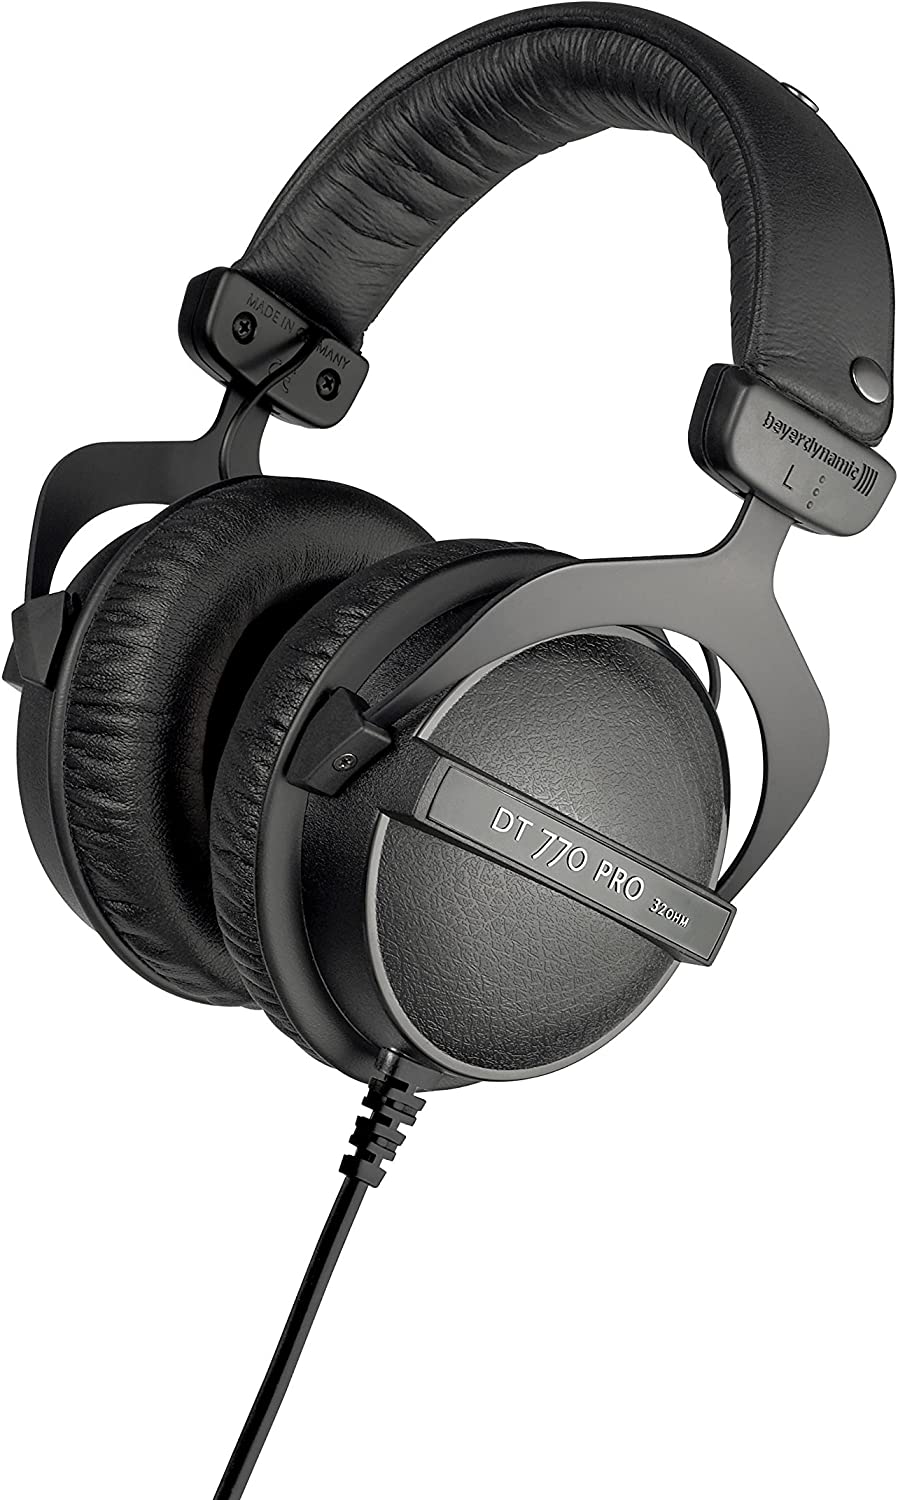 Beyerdynamic DT 770 Pro Headphones with Splitter and Extension Cable -